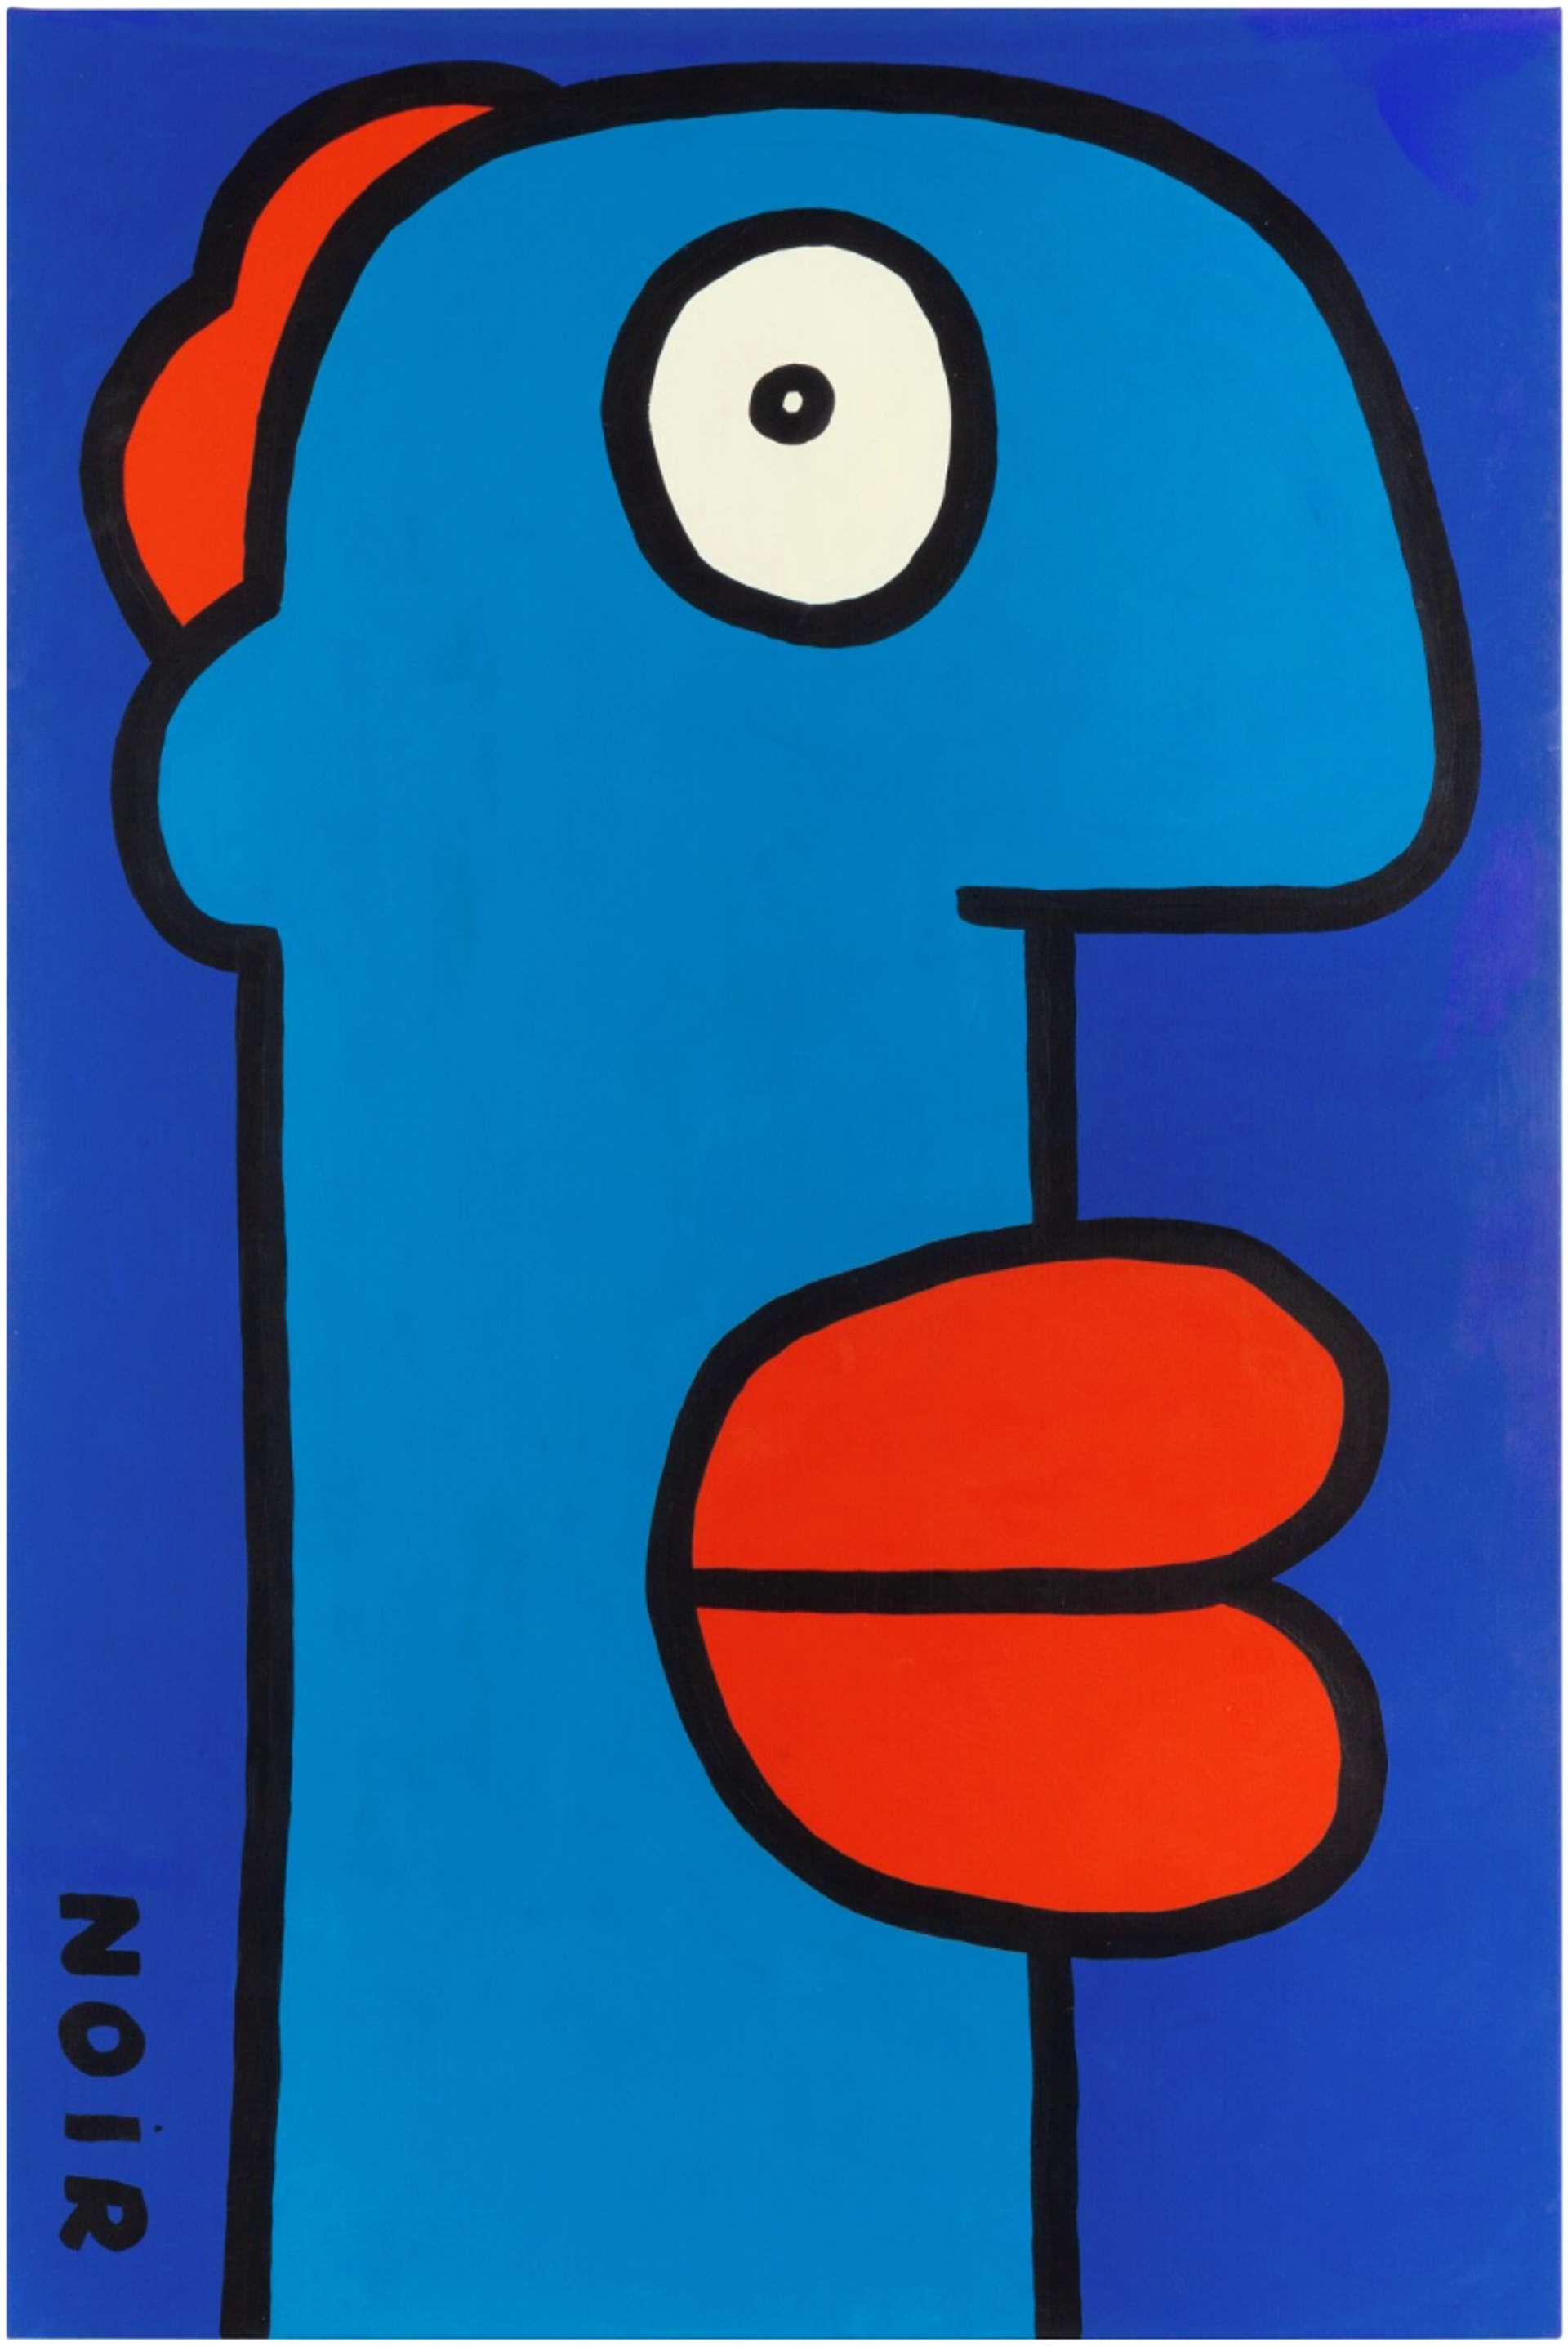 An abstracted canvas with prominent shades of blue. A side-profiled caricature is drawn in thick, bold black lines, creating an enlarged and exaggerated face using abstracted colors. The figure features exaggerated red lips, a small patch of red hair, and one white eyeball.